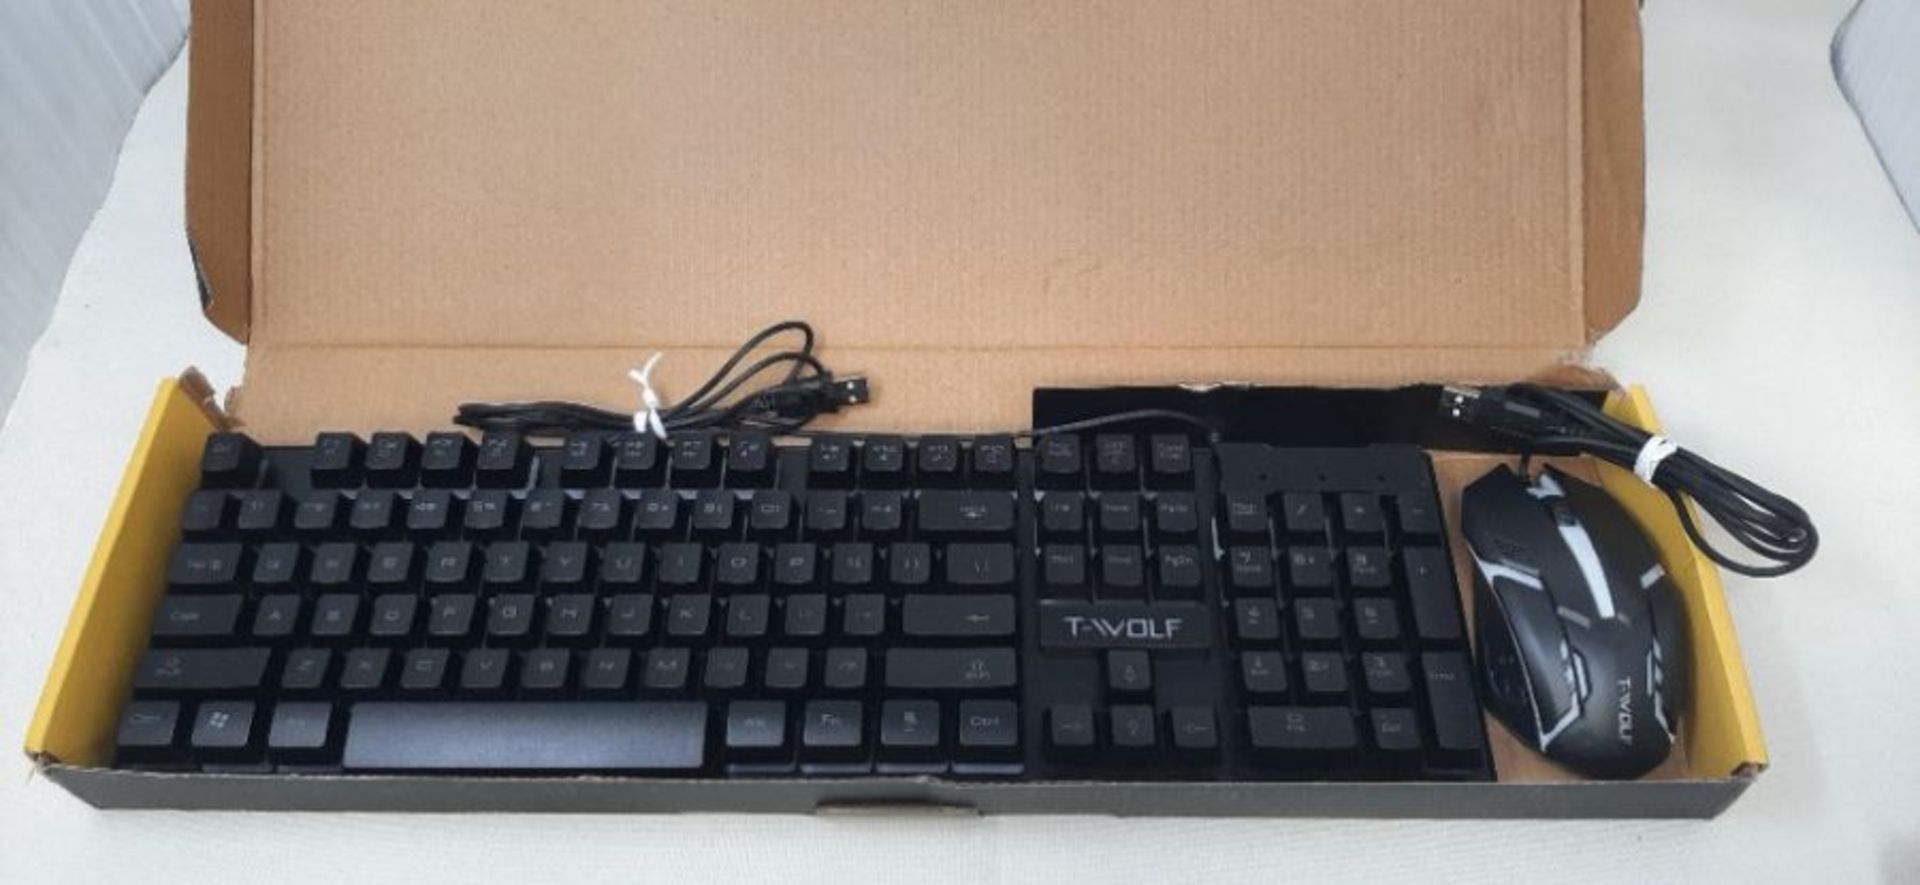 Rainbow Lit Gaming Keyboard and Mouse Mechanical Feel - Image 2 of 3